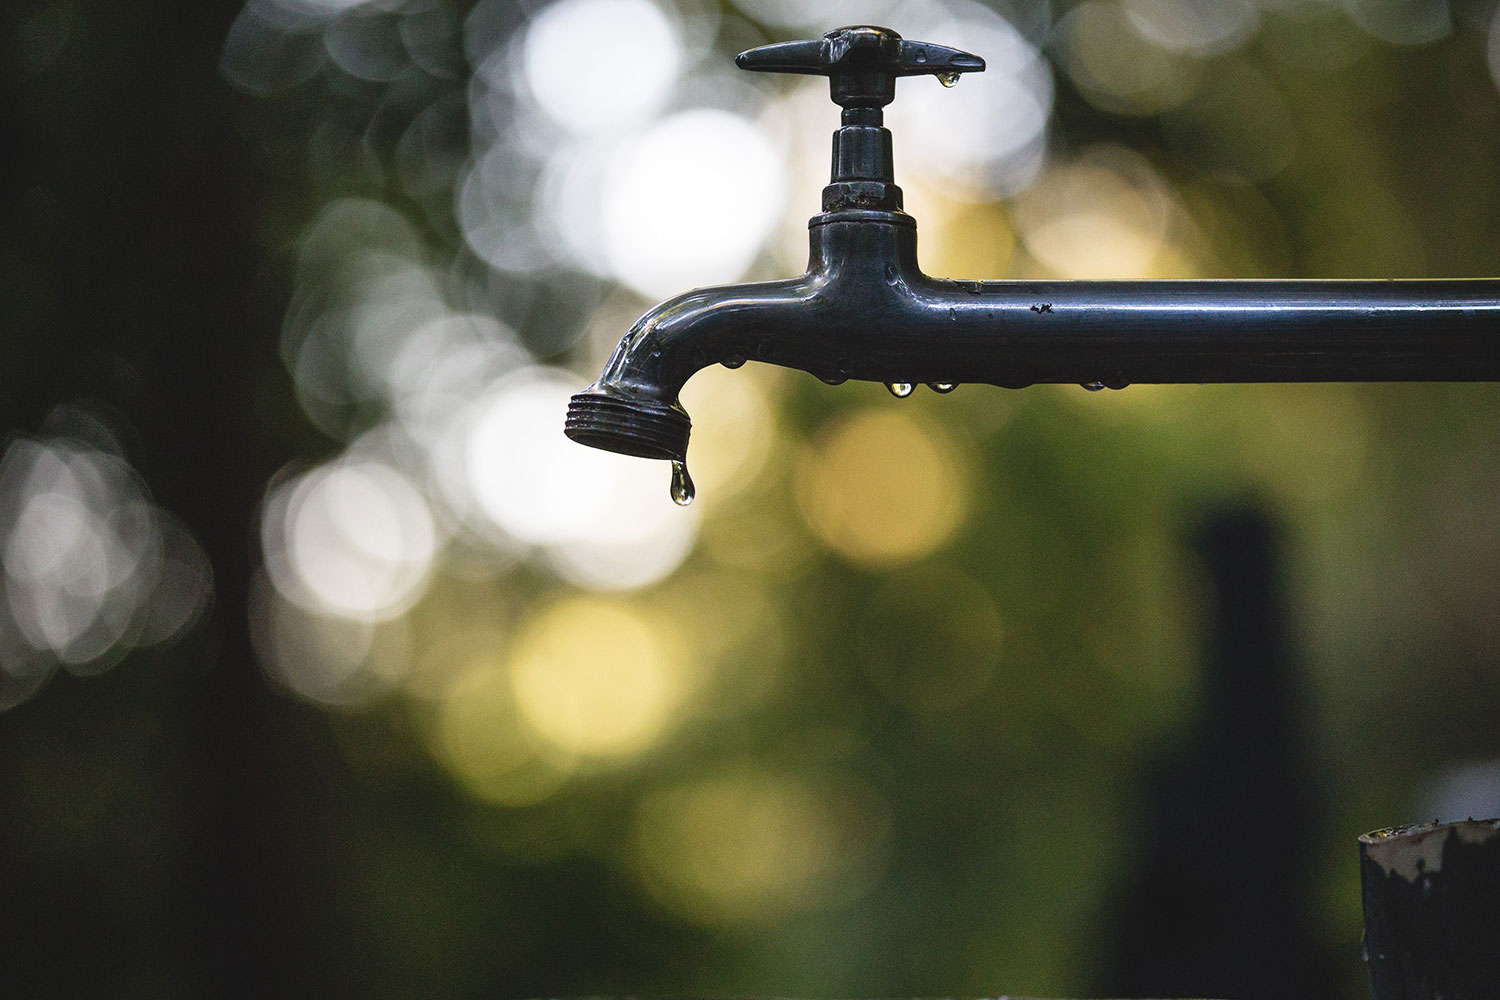 How Much Water Does A Leaking Faucet Waste Every Month?